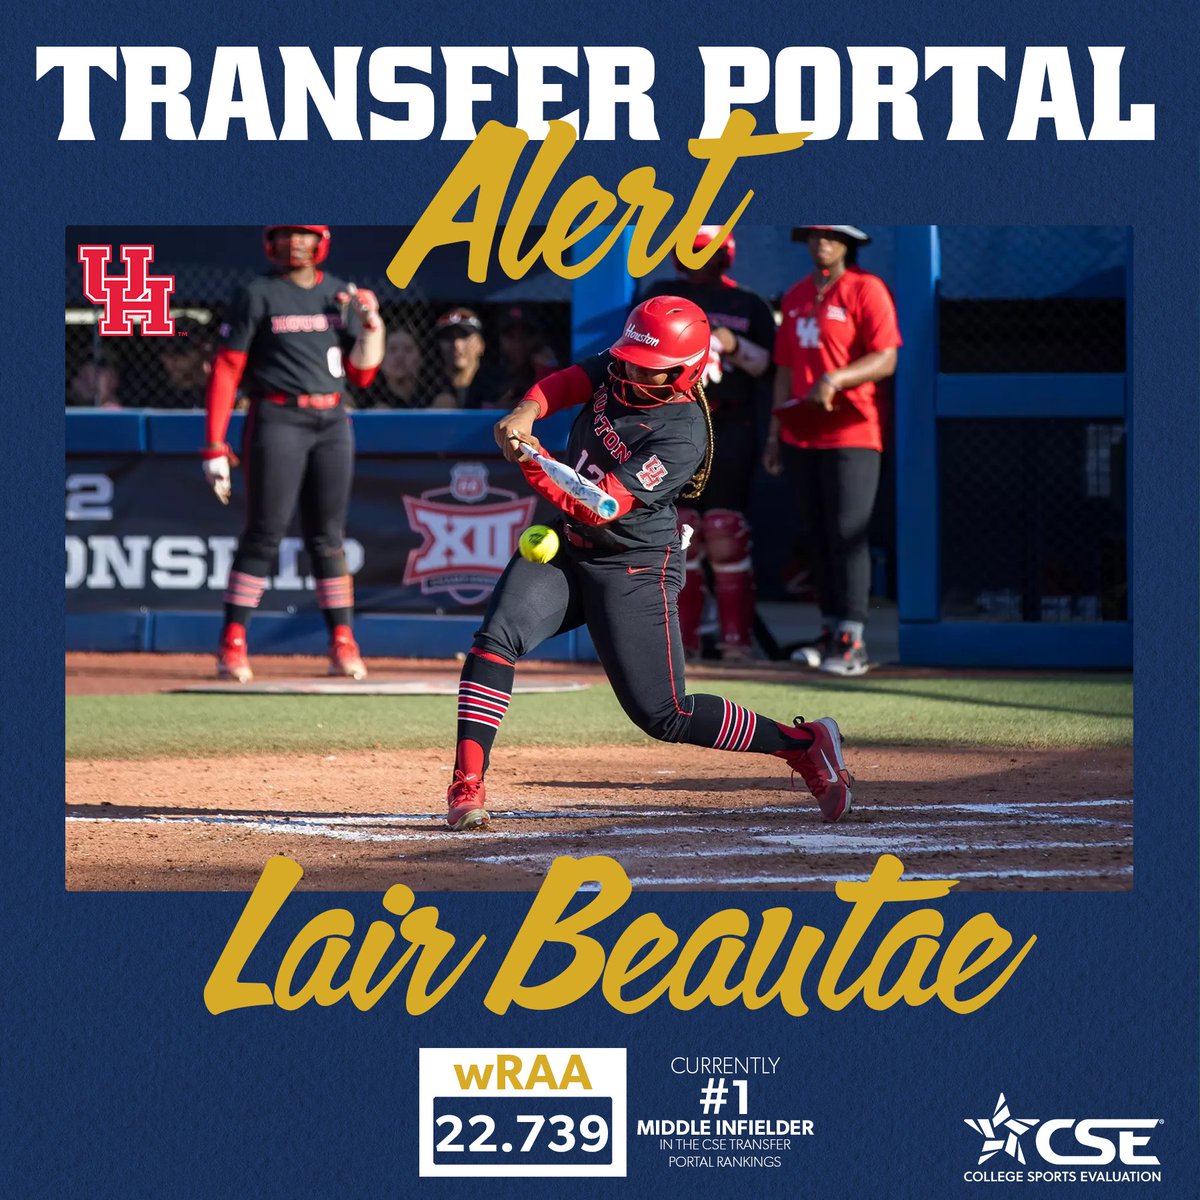 Lair Beautae enters the CSE Transfer Portal Rankings as the new #1 Middle Infielder! .336 BA | .471 OBP | .584 SLG Check out more of Lair's stats and rankings⬇️ app.cseval.com/transfer-porta… @LairBeautae